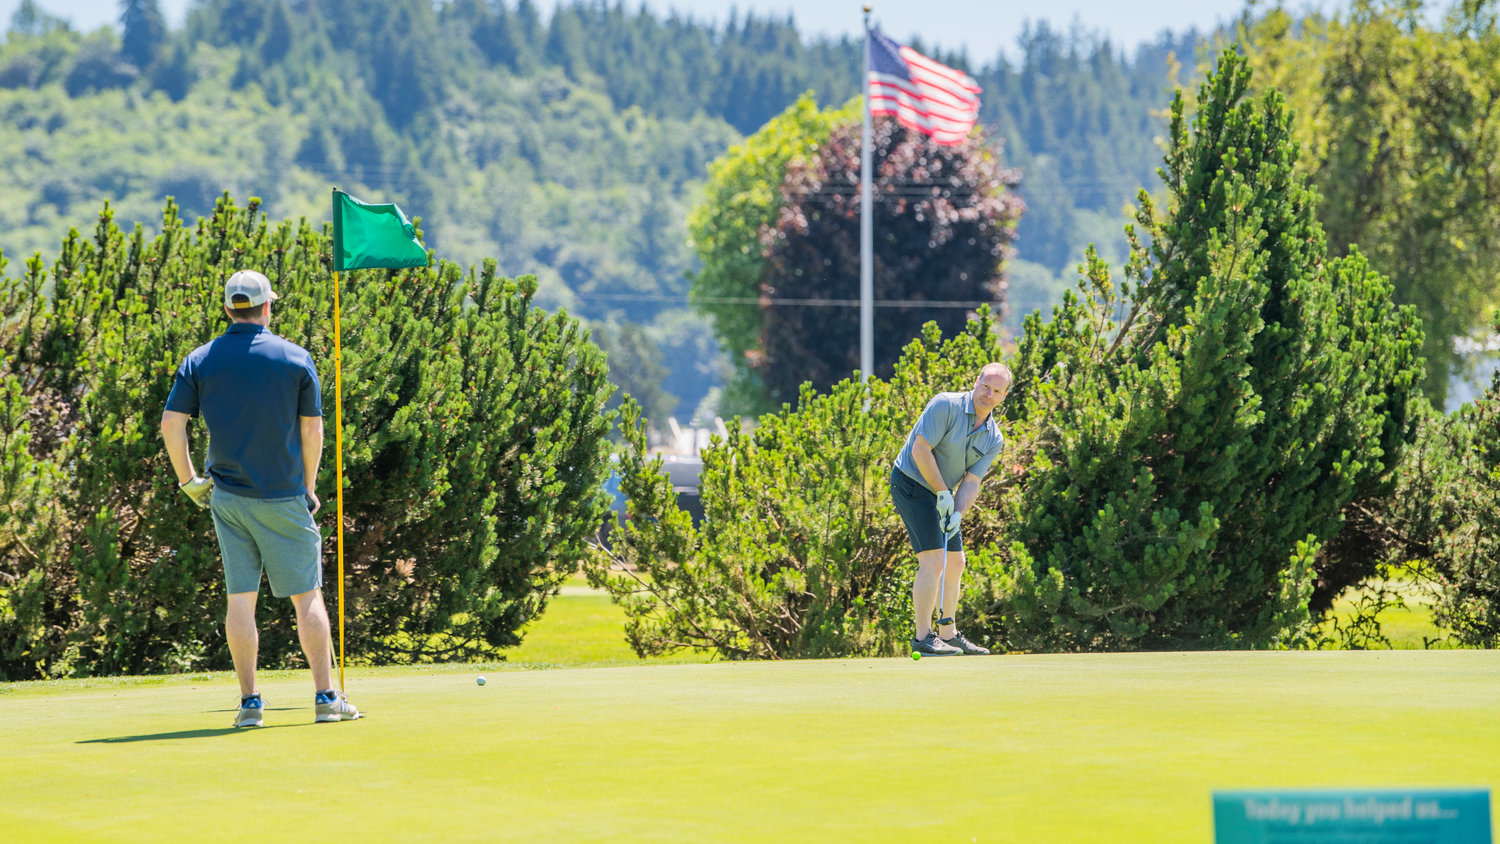 Chad Taylor attempts a put Friday, during a charity tournament raising money for the Hope Alliance, at Riverside Golf Course in Chehalis.